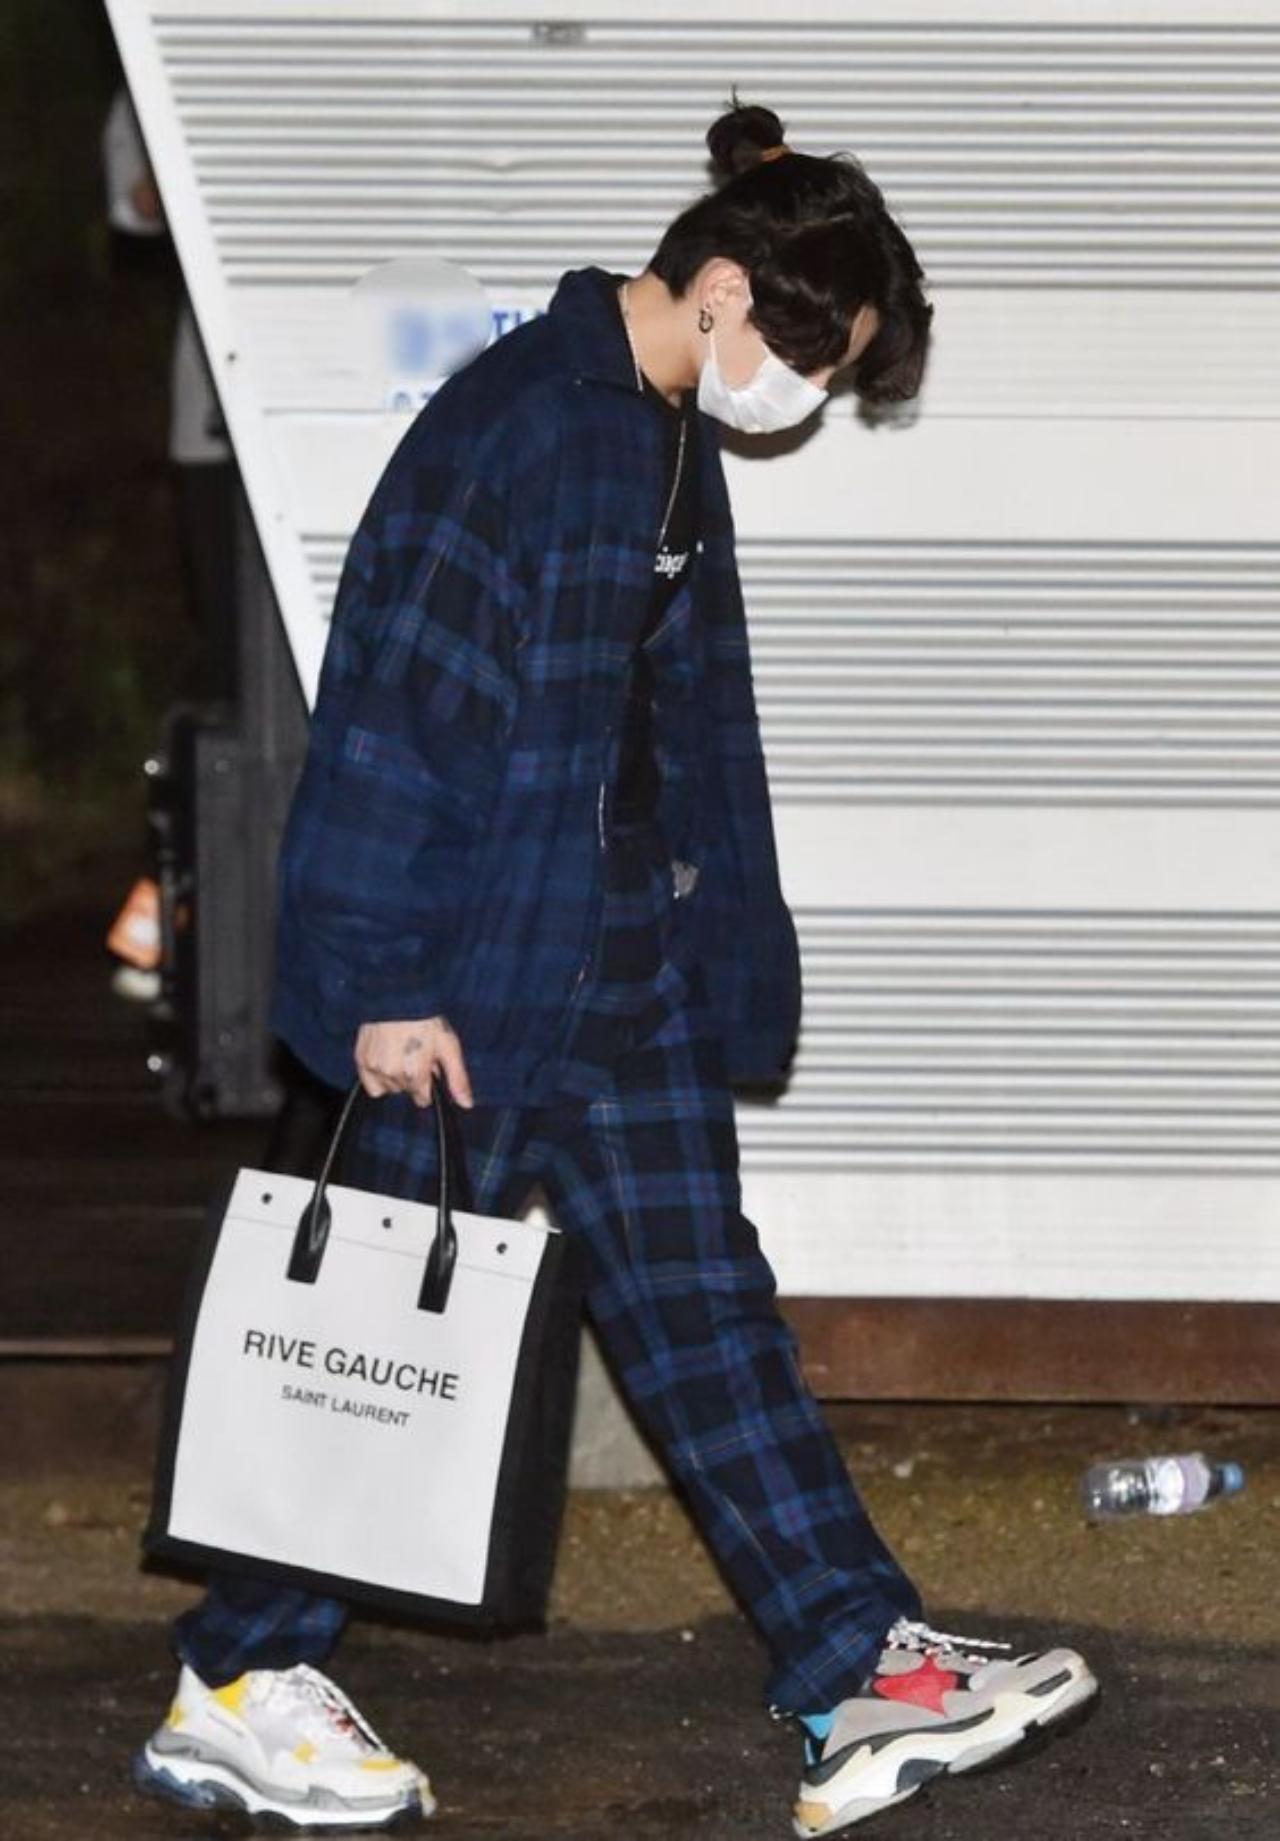 Flannel is back in style! Jungkook sported a lot of checkered outfits during BTS's Dynamite era - and this blue outfit too keeps in line with the retro '90s America vibe of their summer pop song